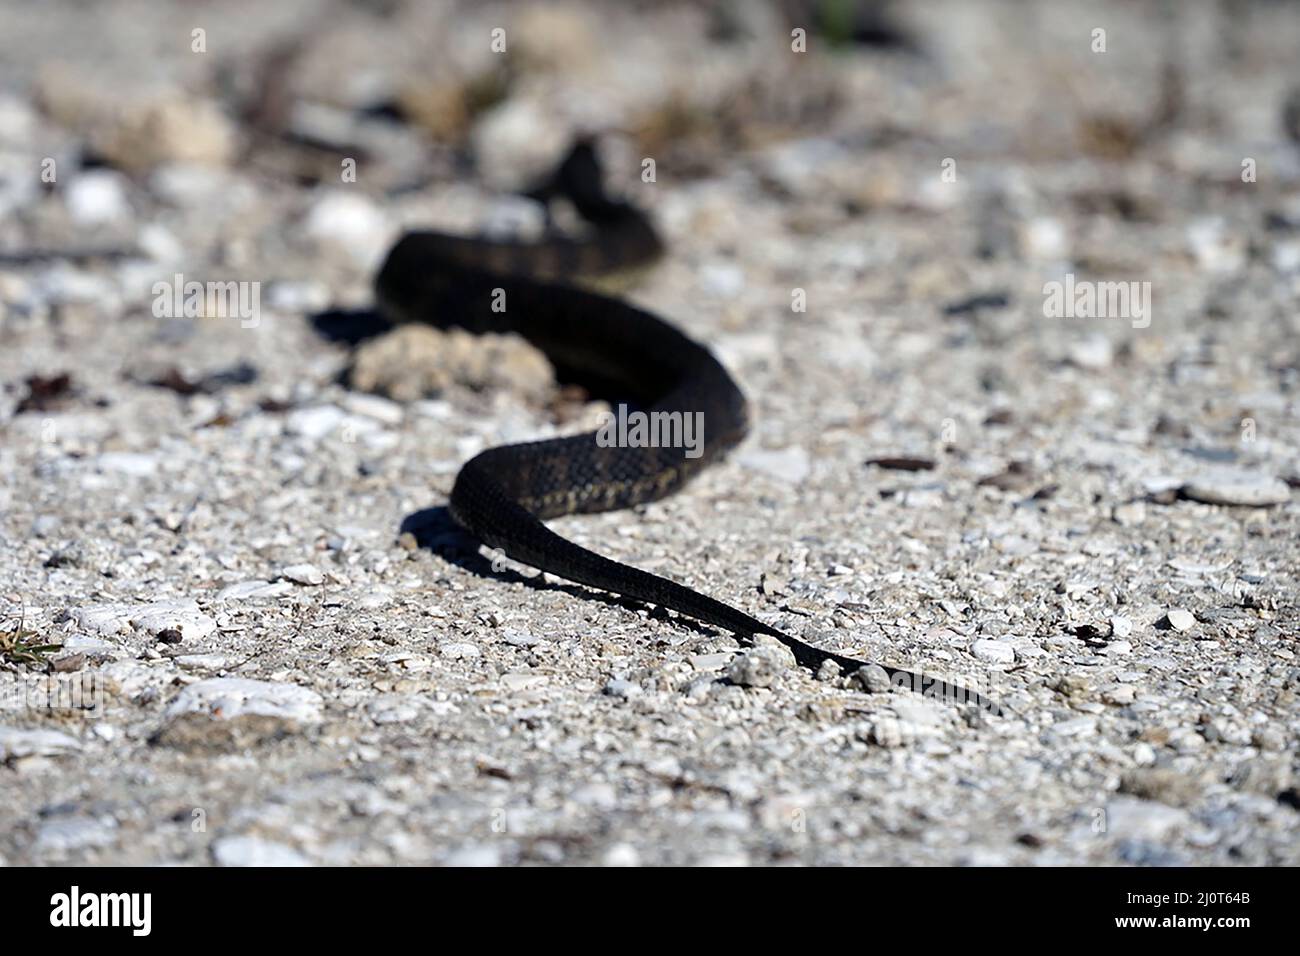 Mississippi green watersnake In Vero Beach Park Stock Photo